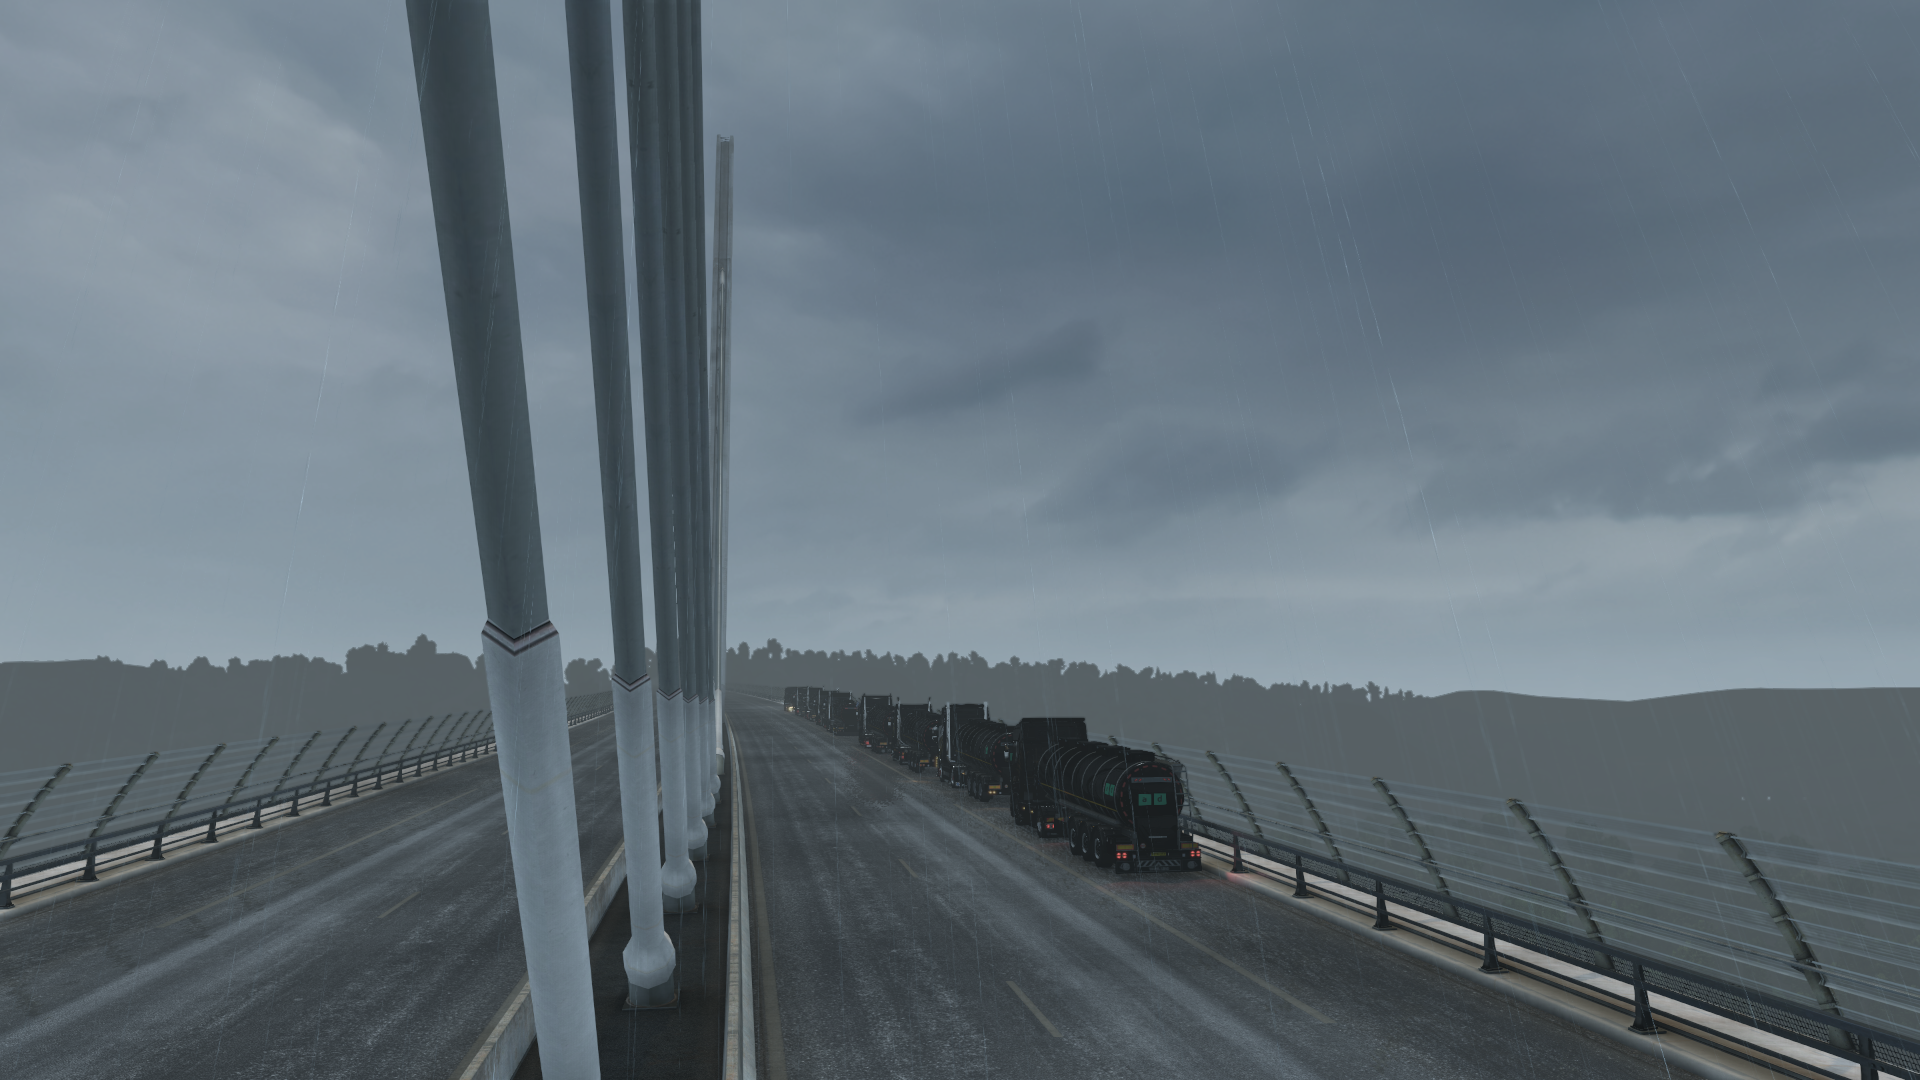 ets2_20210403_235905_00.png